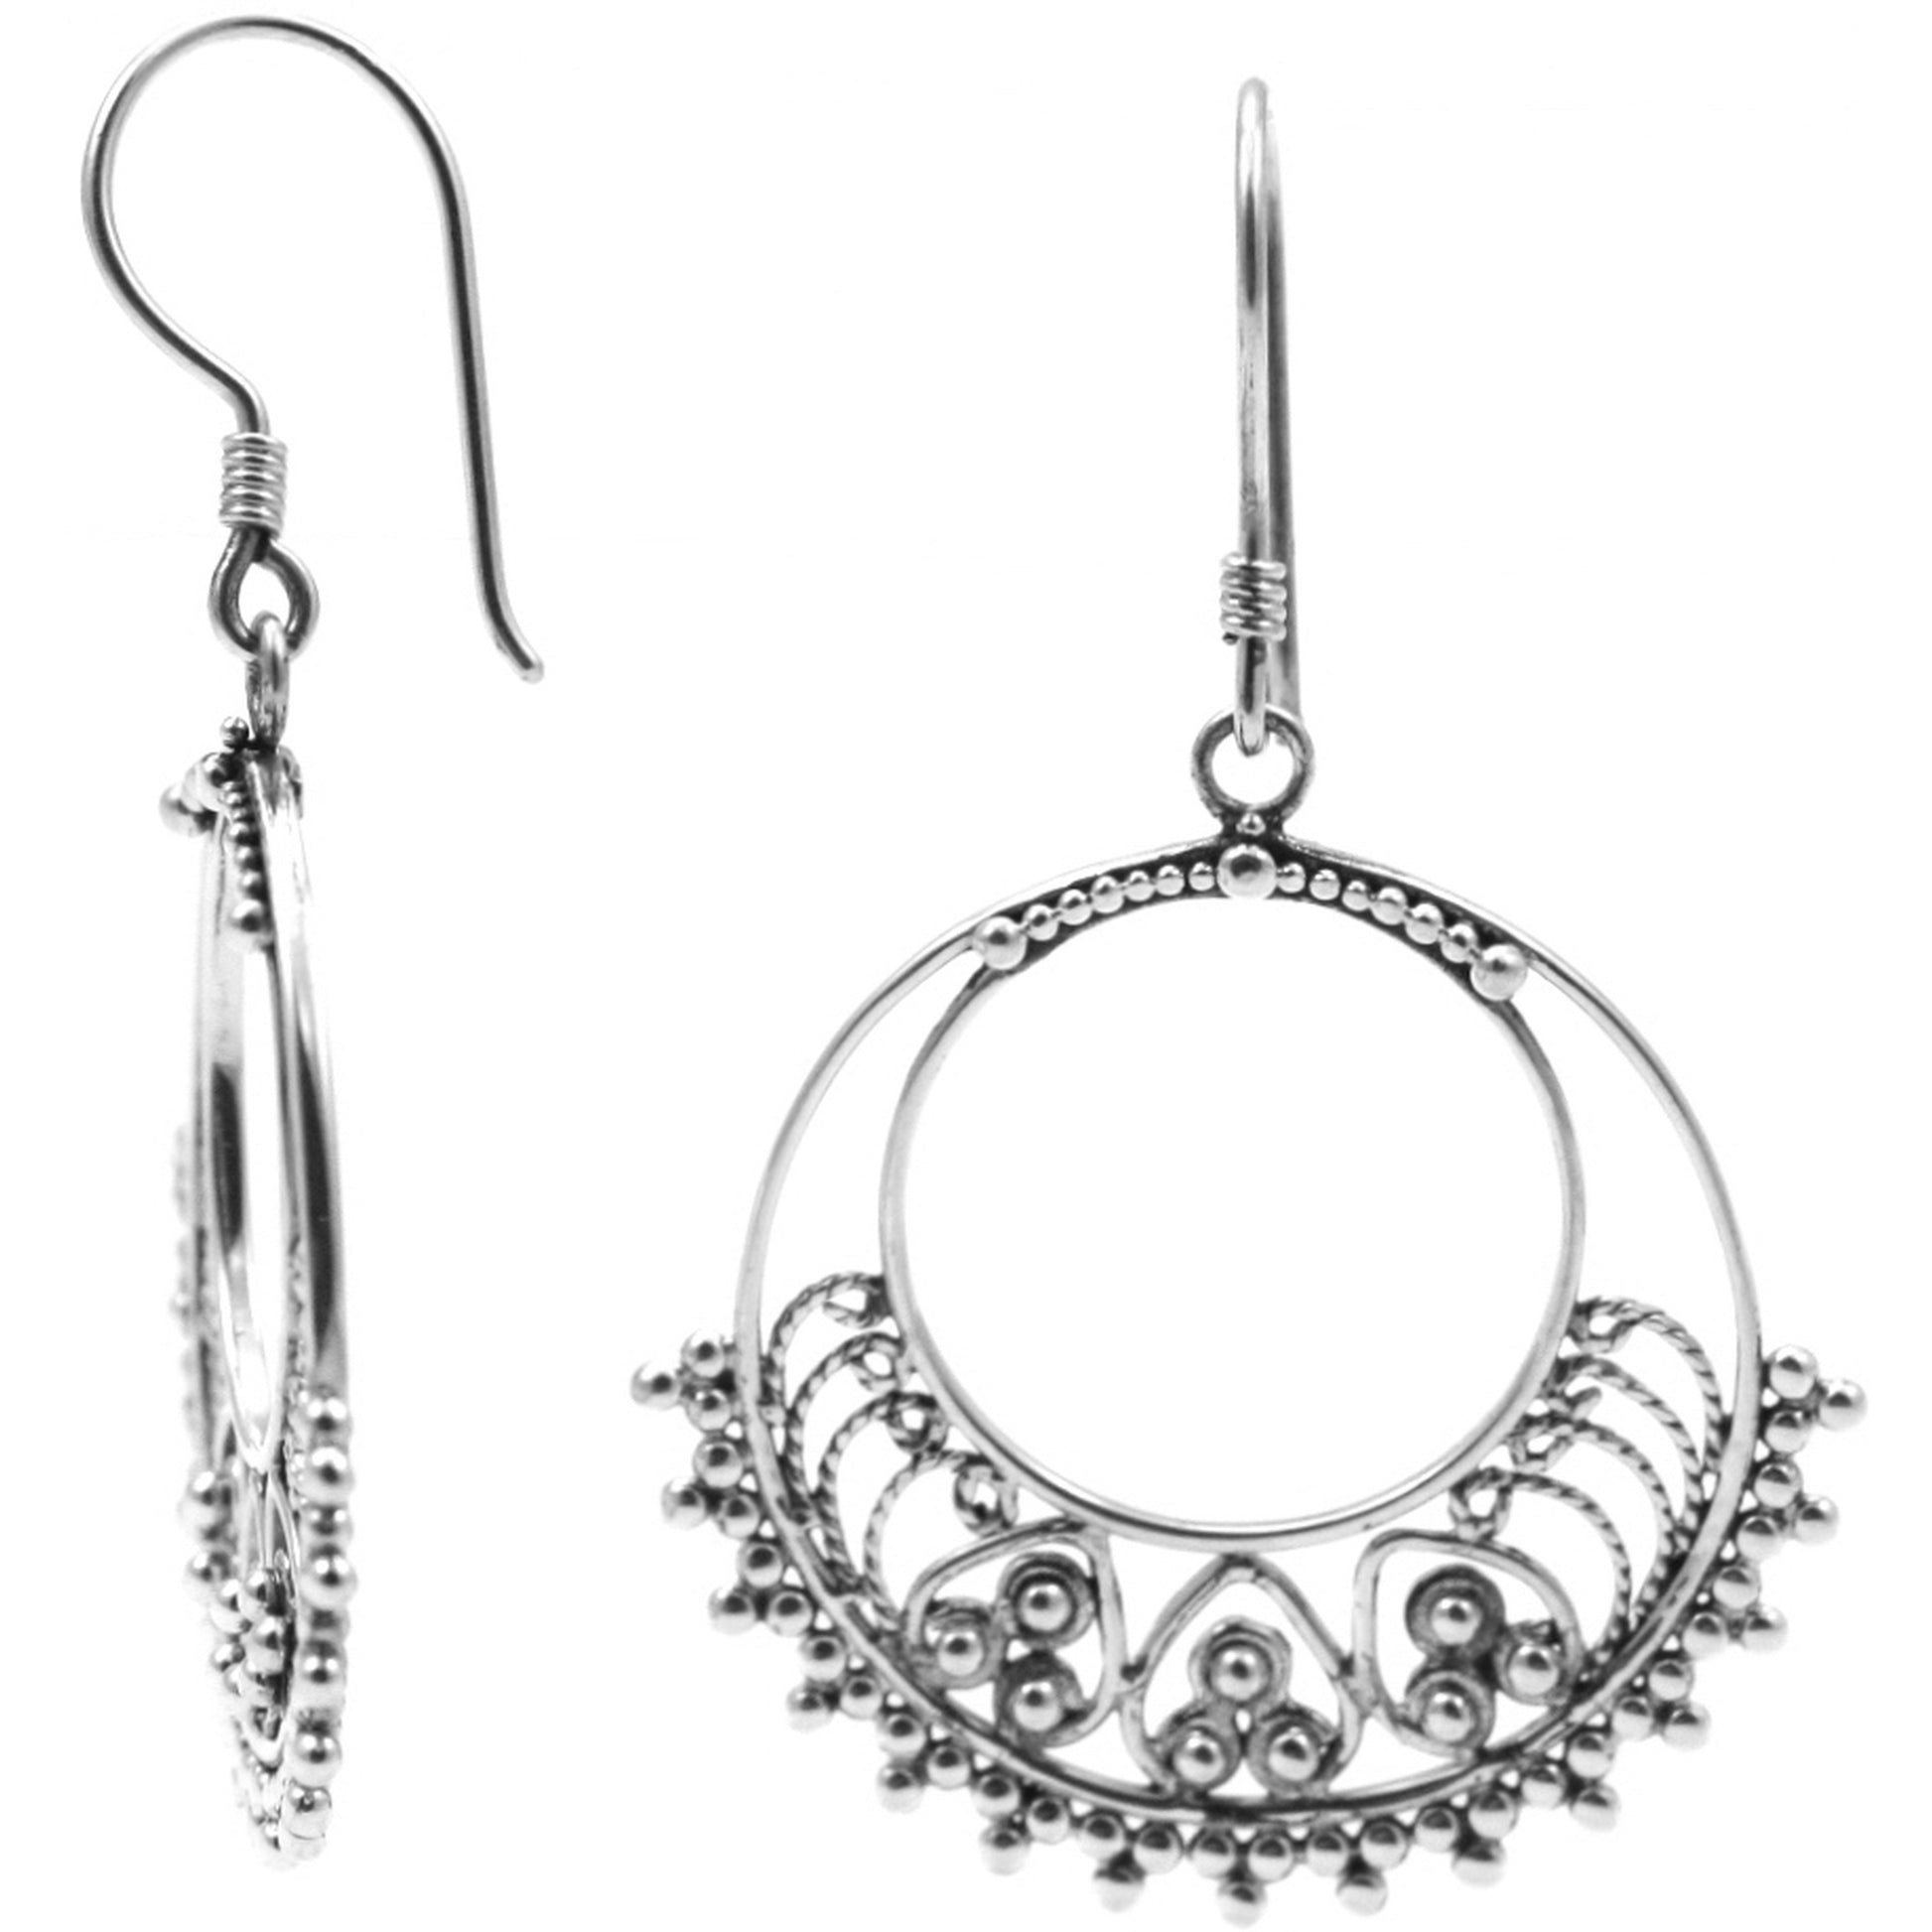 Silver wire filigree and beads drop earrings.